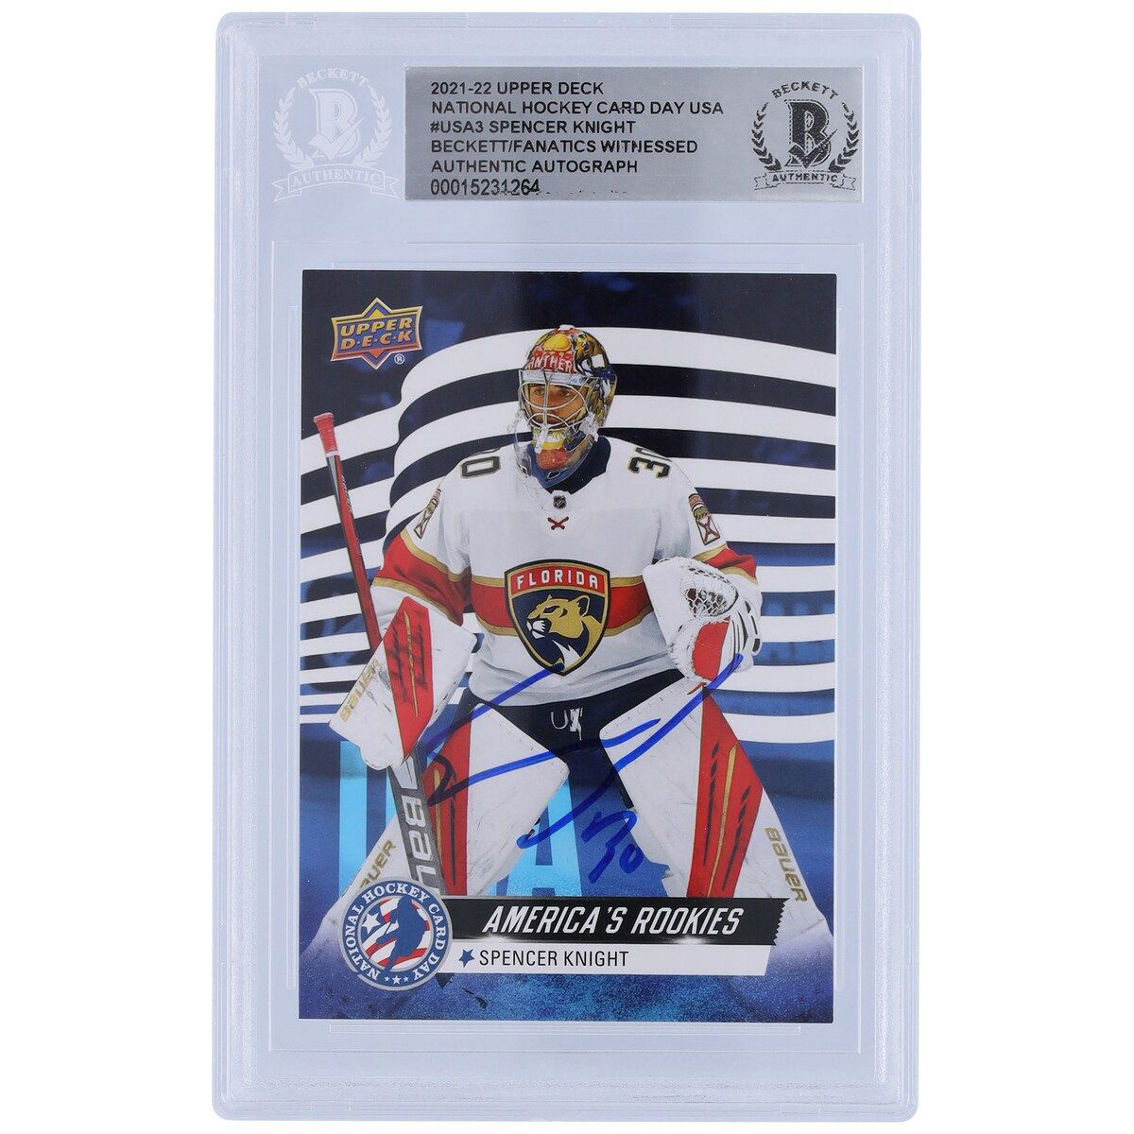 Upper Deck Spencer Knight Florida Panthers Autographed 2021-22 Upper Deck National Hockey Card Day America's Rookies #USA-3 Beckett Fanatics Witnessed Authenticated Rookie Card - Image 2 of 3